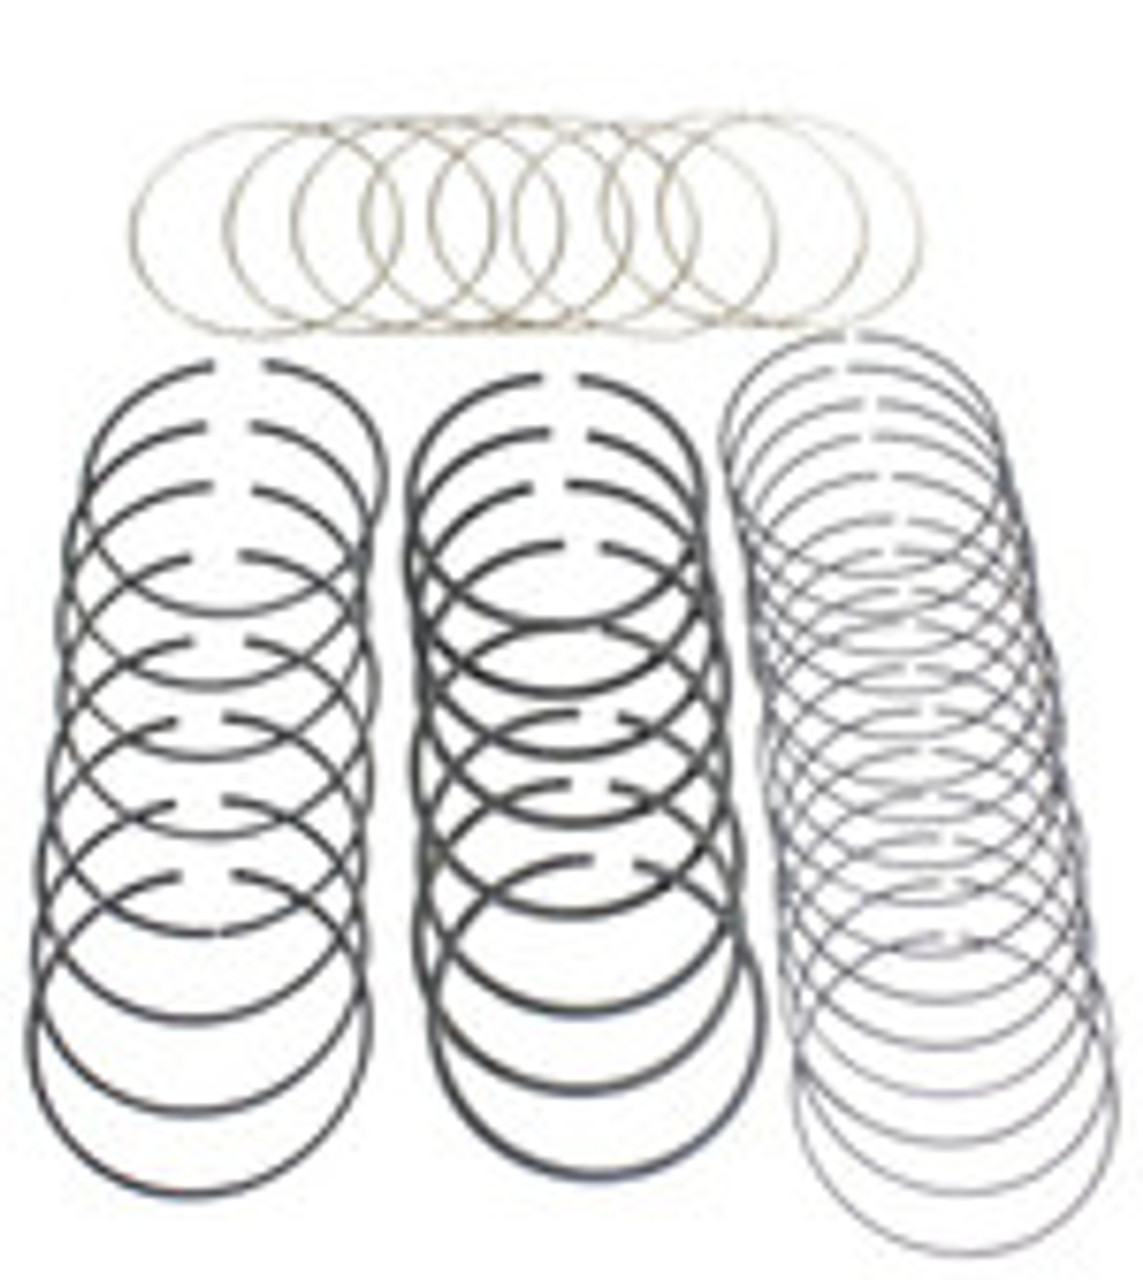 Piston Ring Set - 2013 Ford Expedition 5.4L Engine Parts # PR4150ZE365